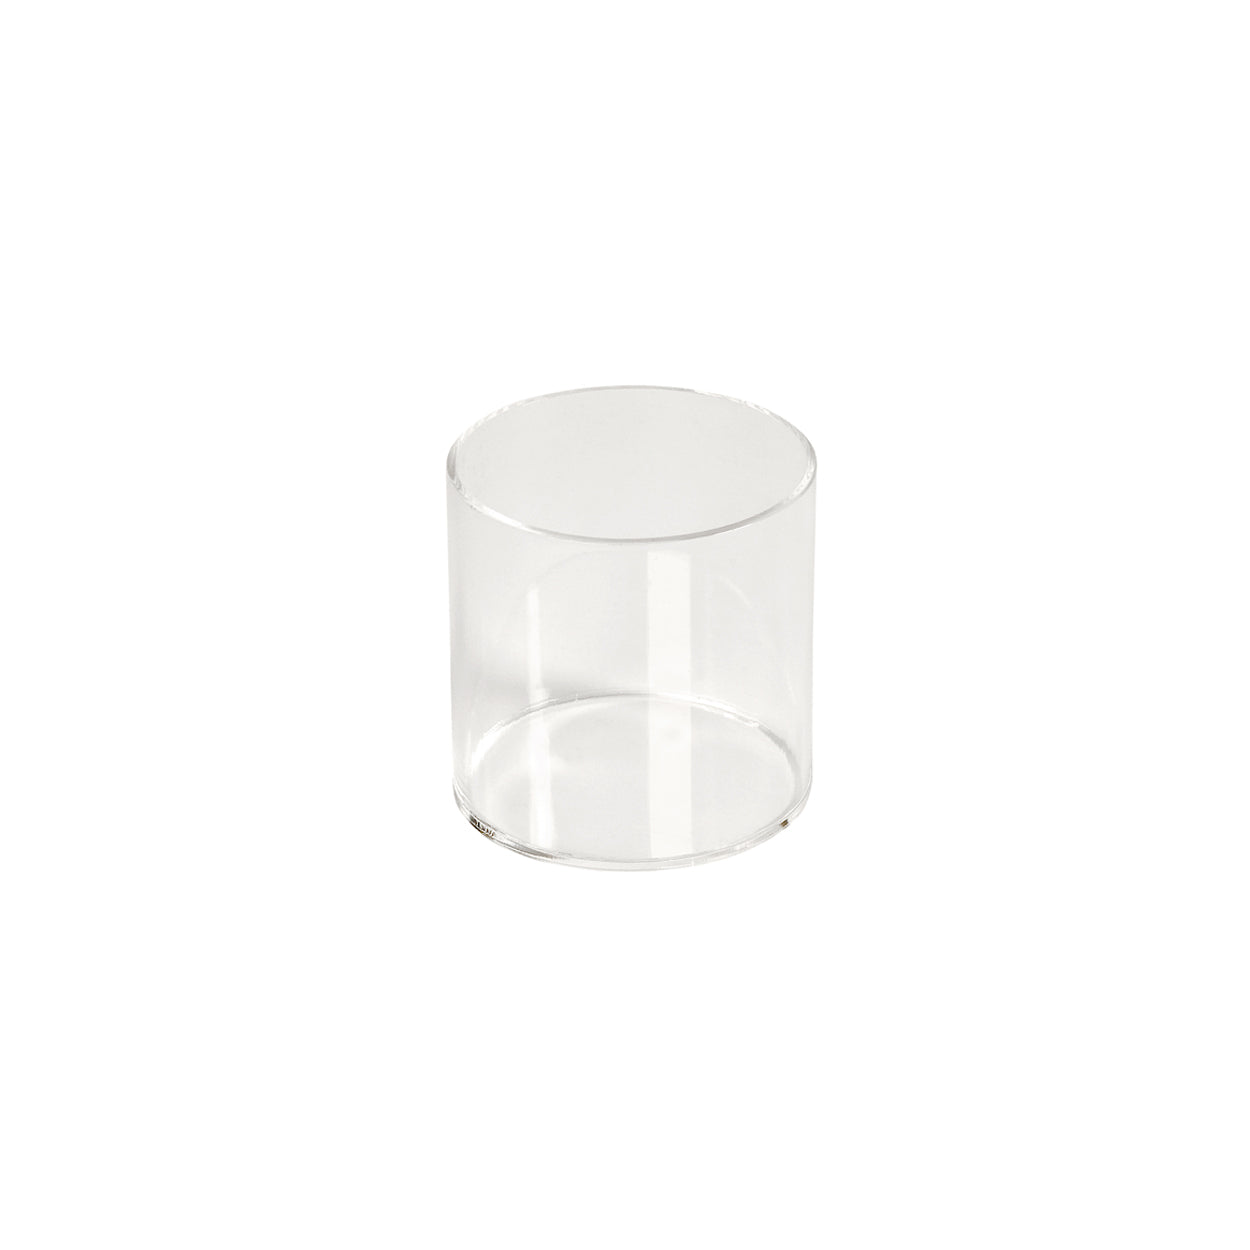 Acrylic Round Container - H100 x 100mm DIA